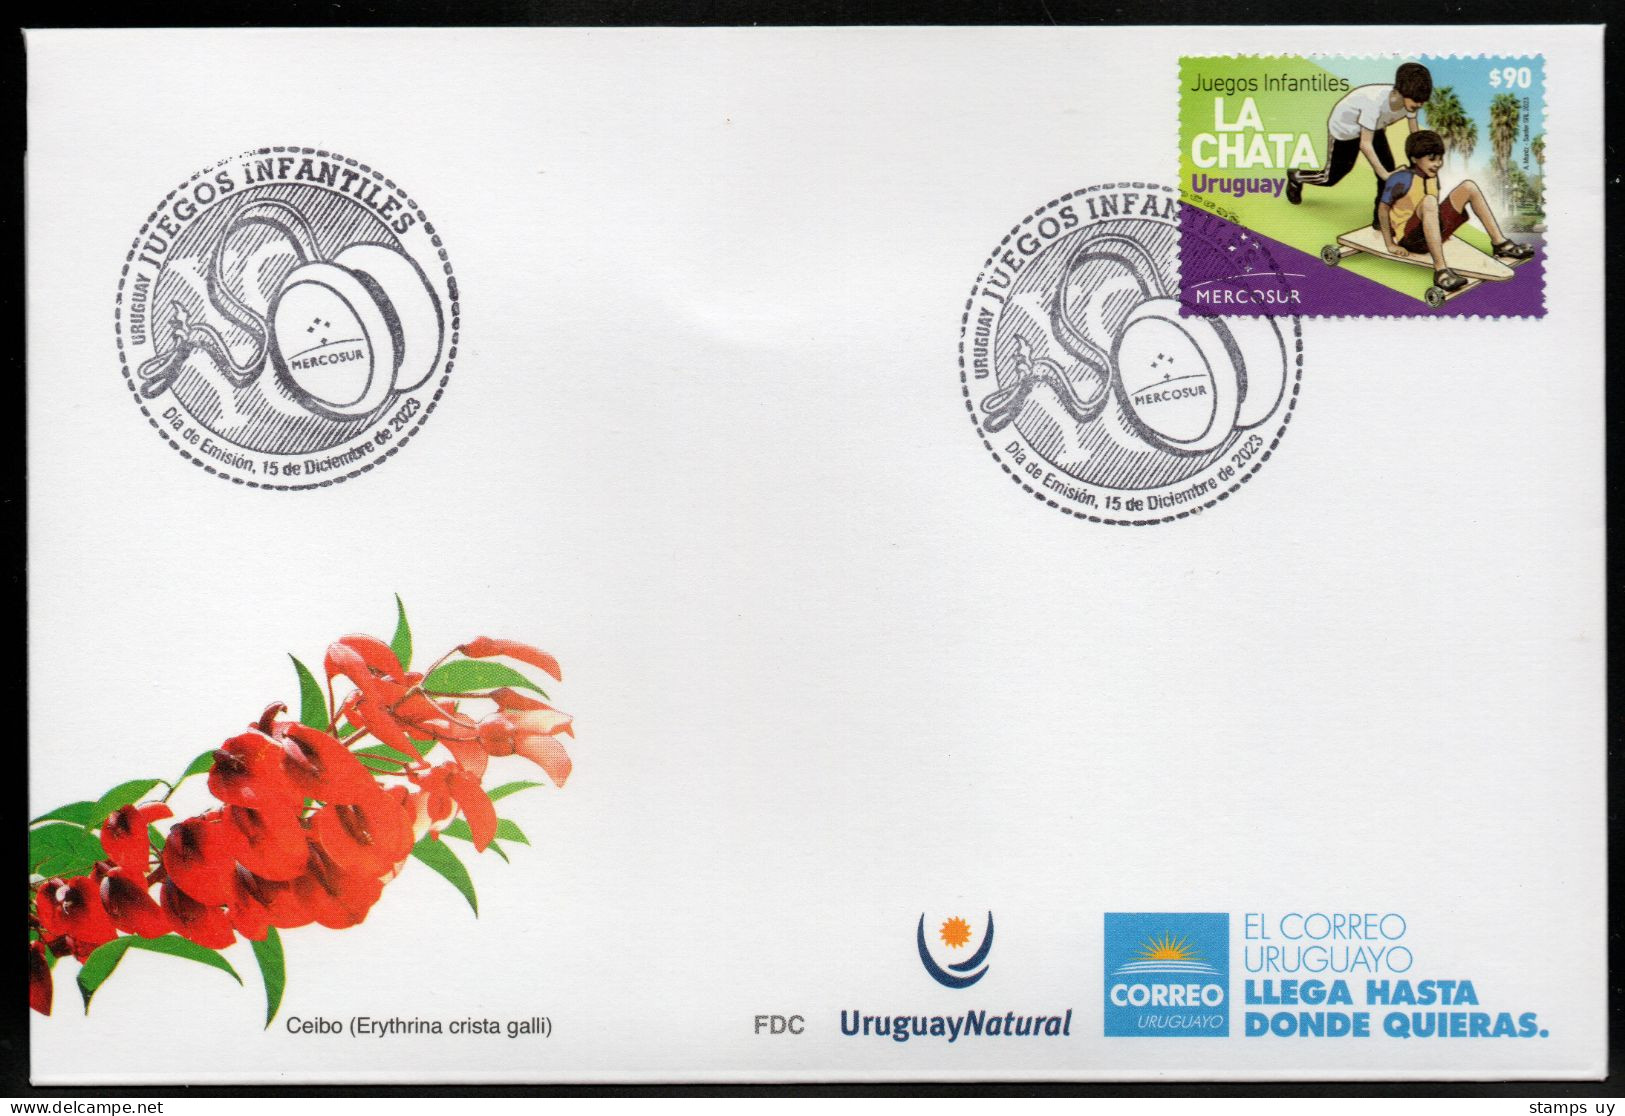 URUGUAY 2023 (Joint Issue, Mercosur, Games, Children, Toys, Wooden Cart, YoYo, Ruleman, Palm, Tree, Crux, Stars) - 1 FDC - Trees